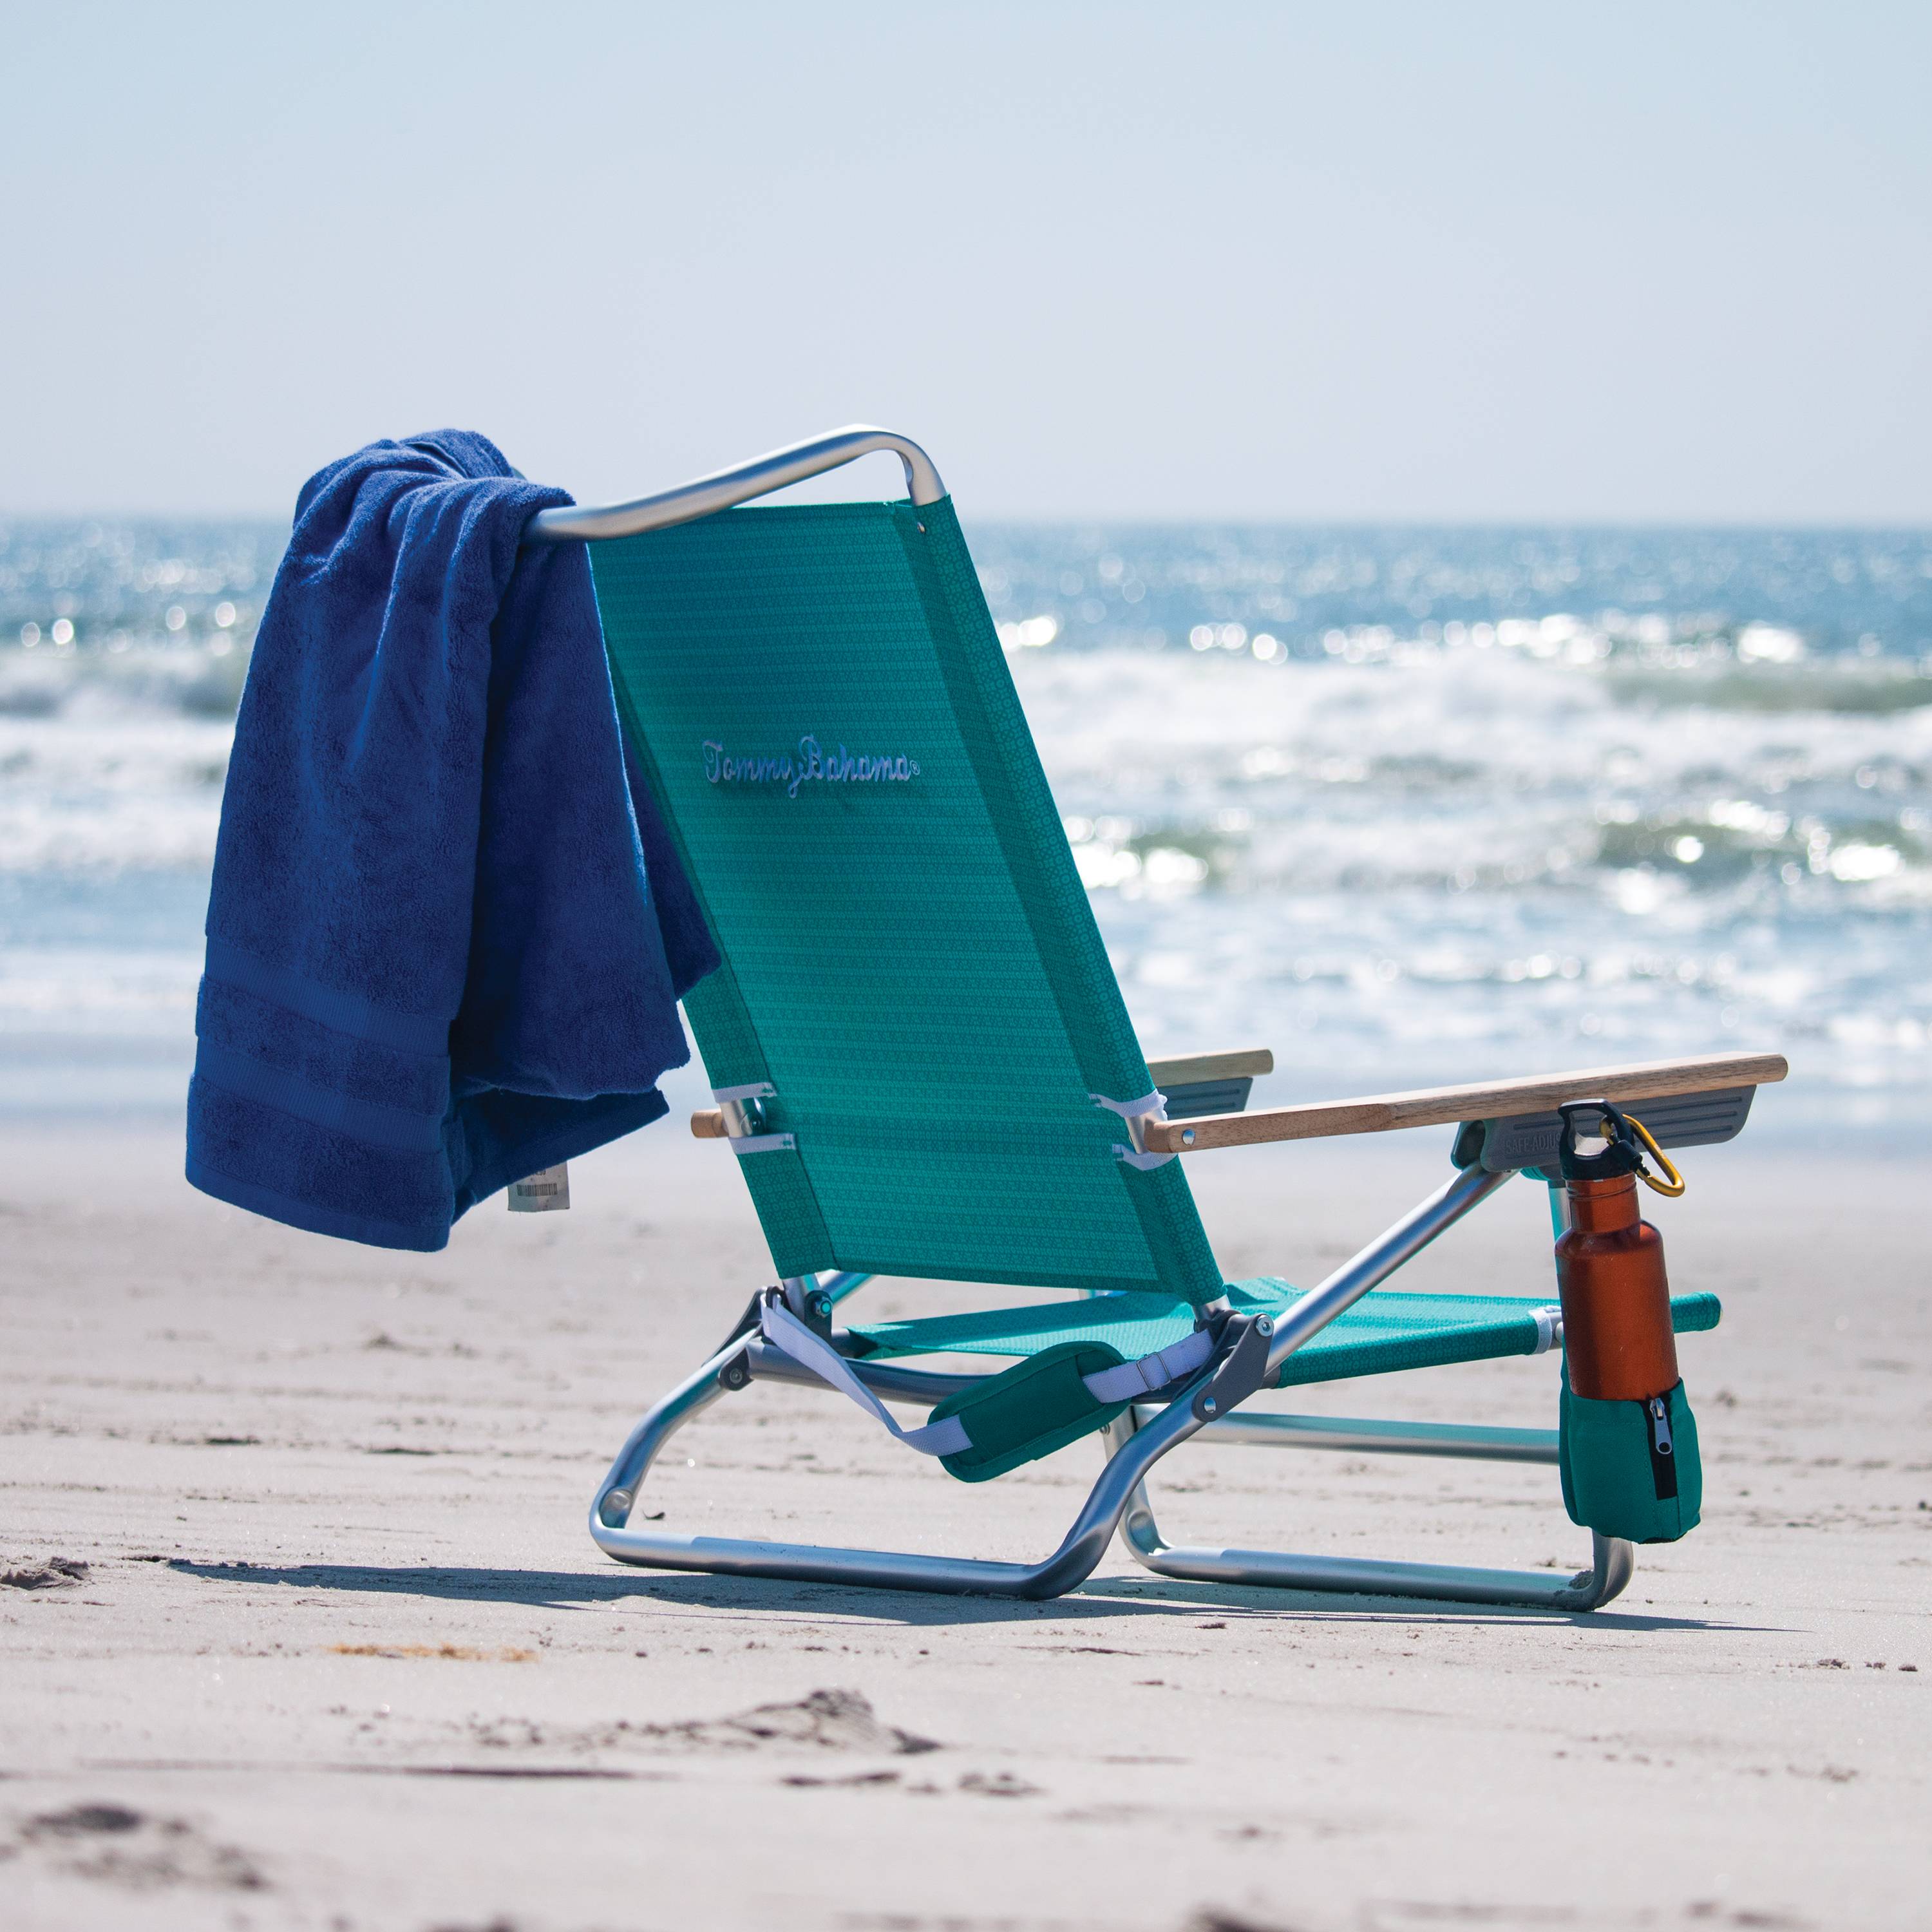 It's not just you. Tommy Bahama beach chairs are everywhere